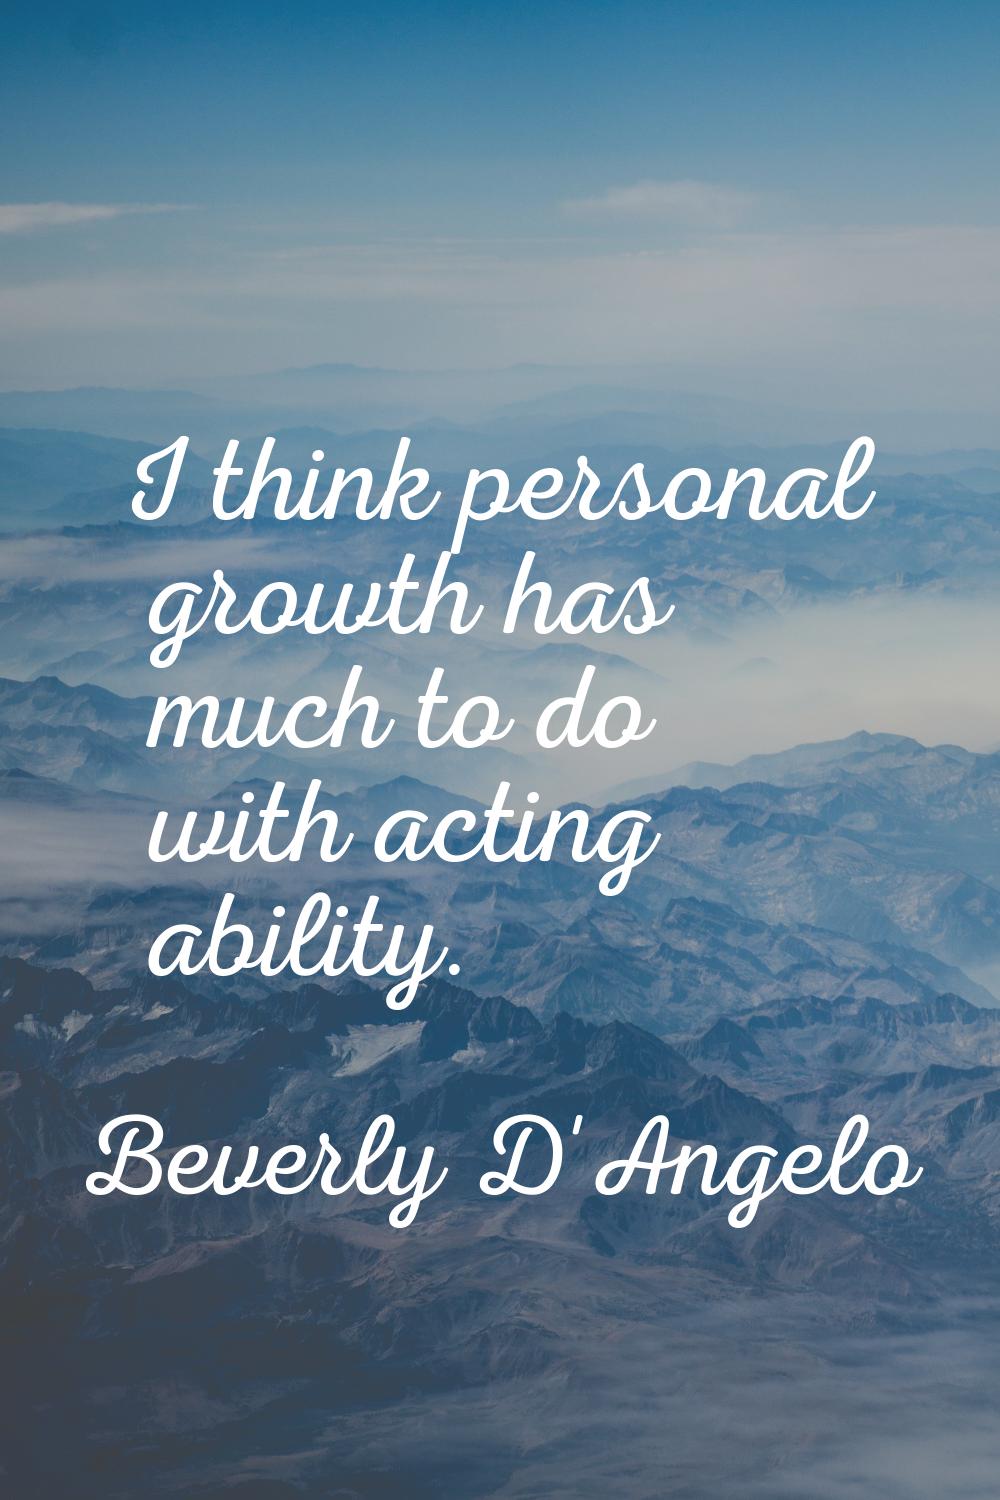 I think personal growth has much to do with acting ability.